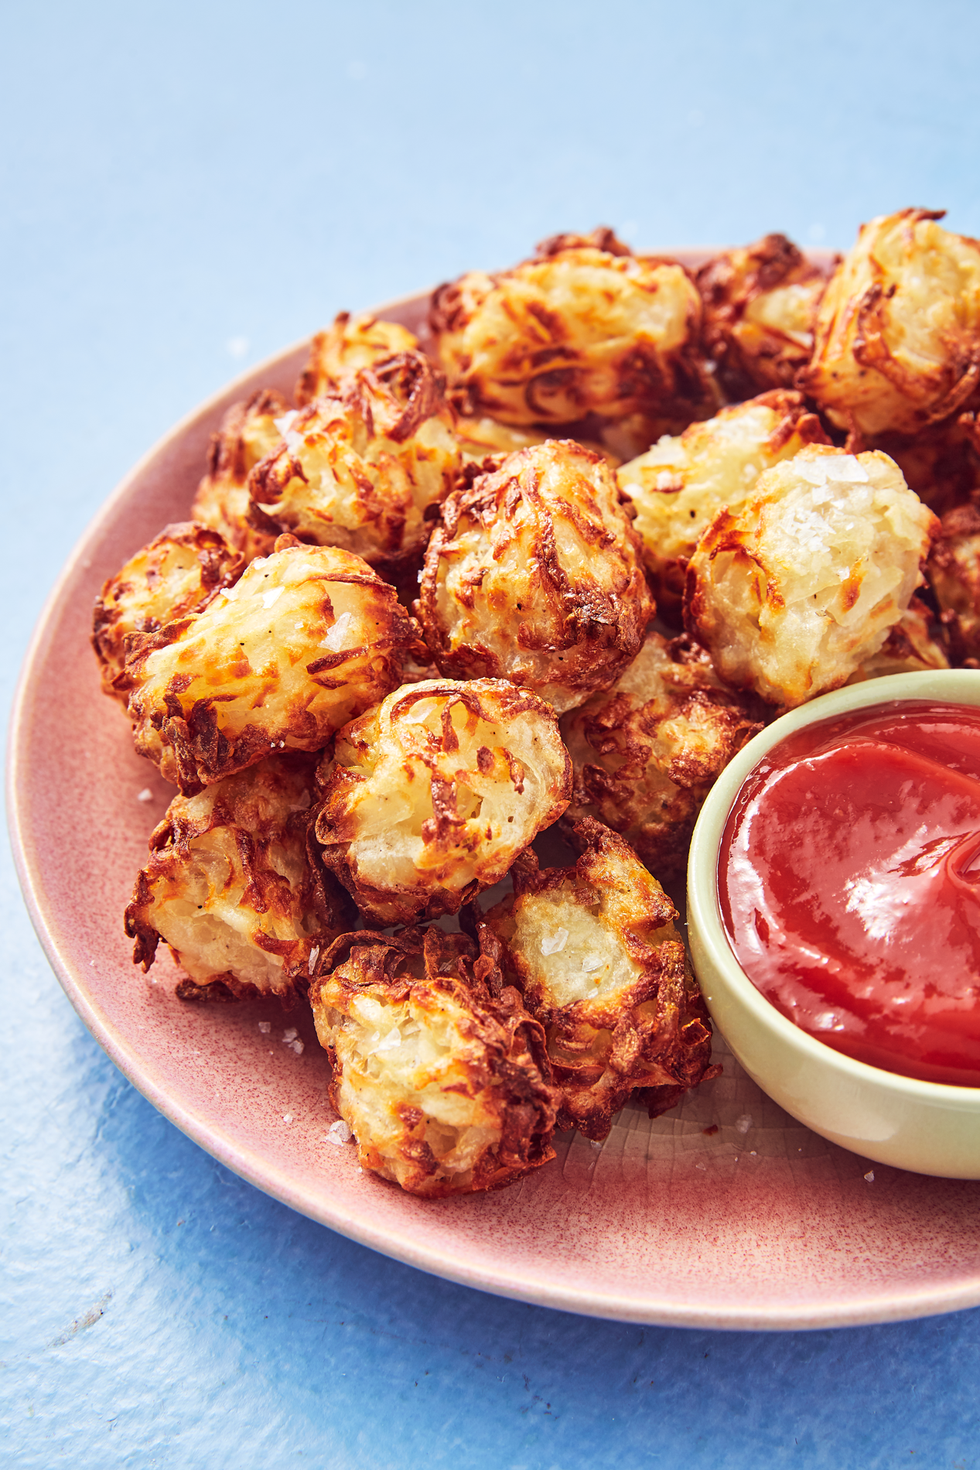 https://hips.hearstapps.com/hmg-prod/images/delish-190619-air-fryer-tater-tots-345-portrait-pf-1561824312.png?crop=1.00xw:1.00xh;0,0&resize=980:*